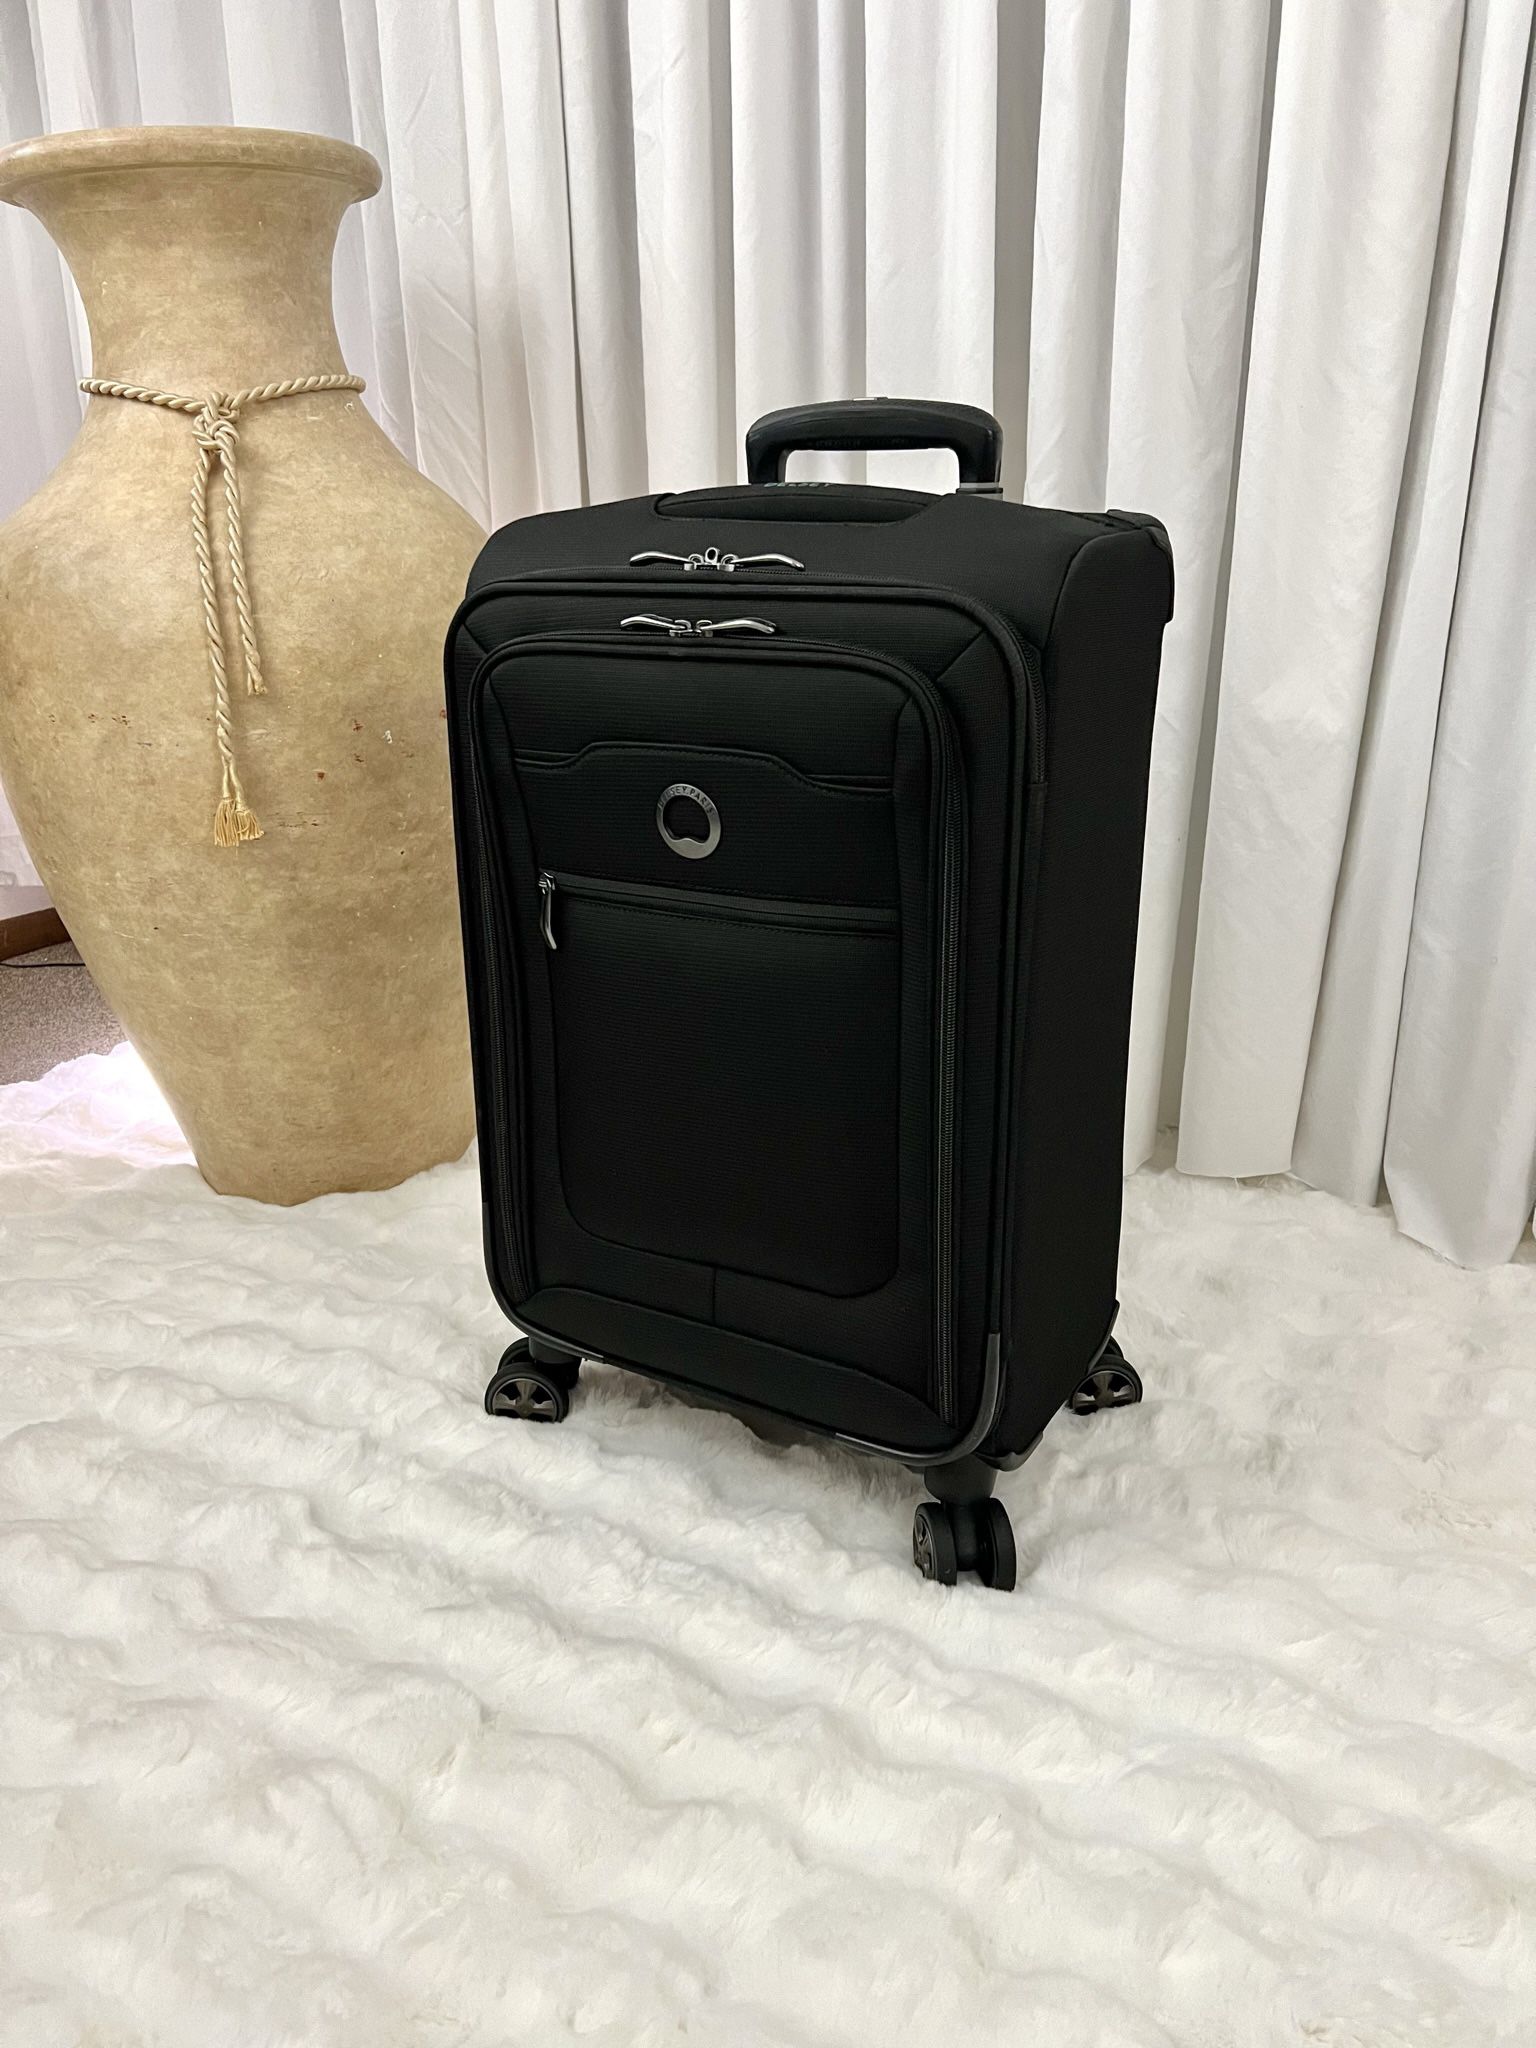 Delsey Carry on Luggage Suitcase